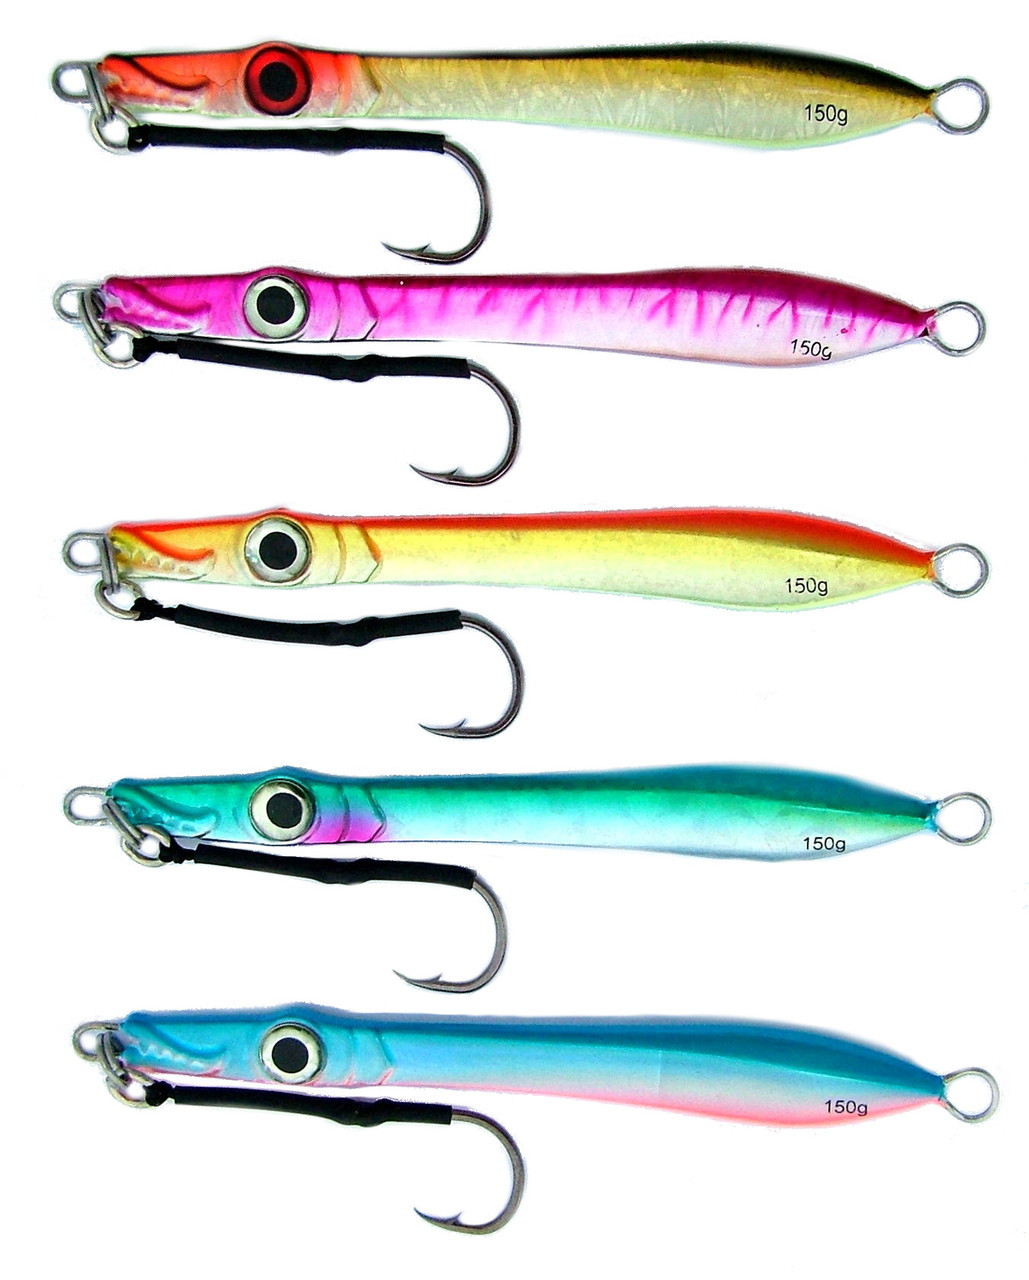 https://cdn10.bigcommerce.com/s-ruolvs/products/199/images/2294/DeepWater_Jigs_150g_X_5_no_packaging_PLB__23308.1511866031.1280.1280.JPG?c=2